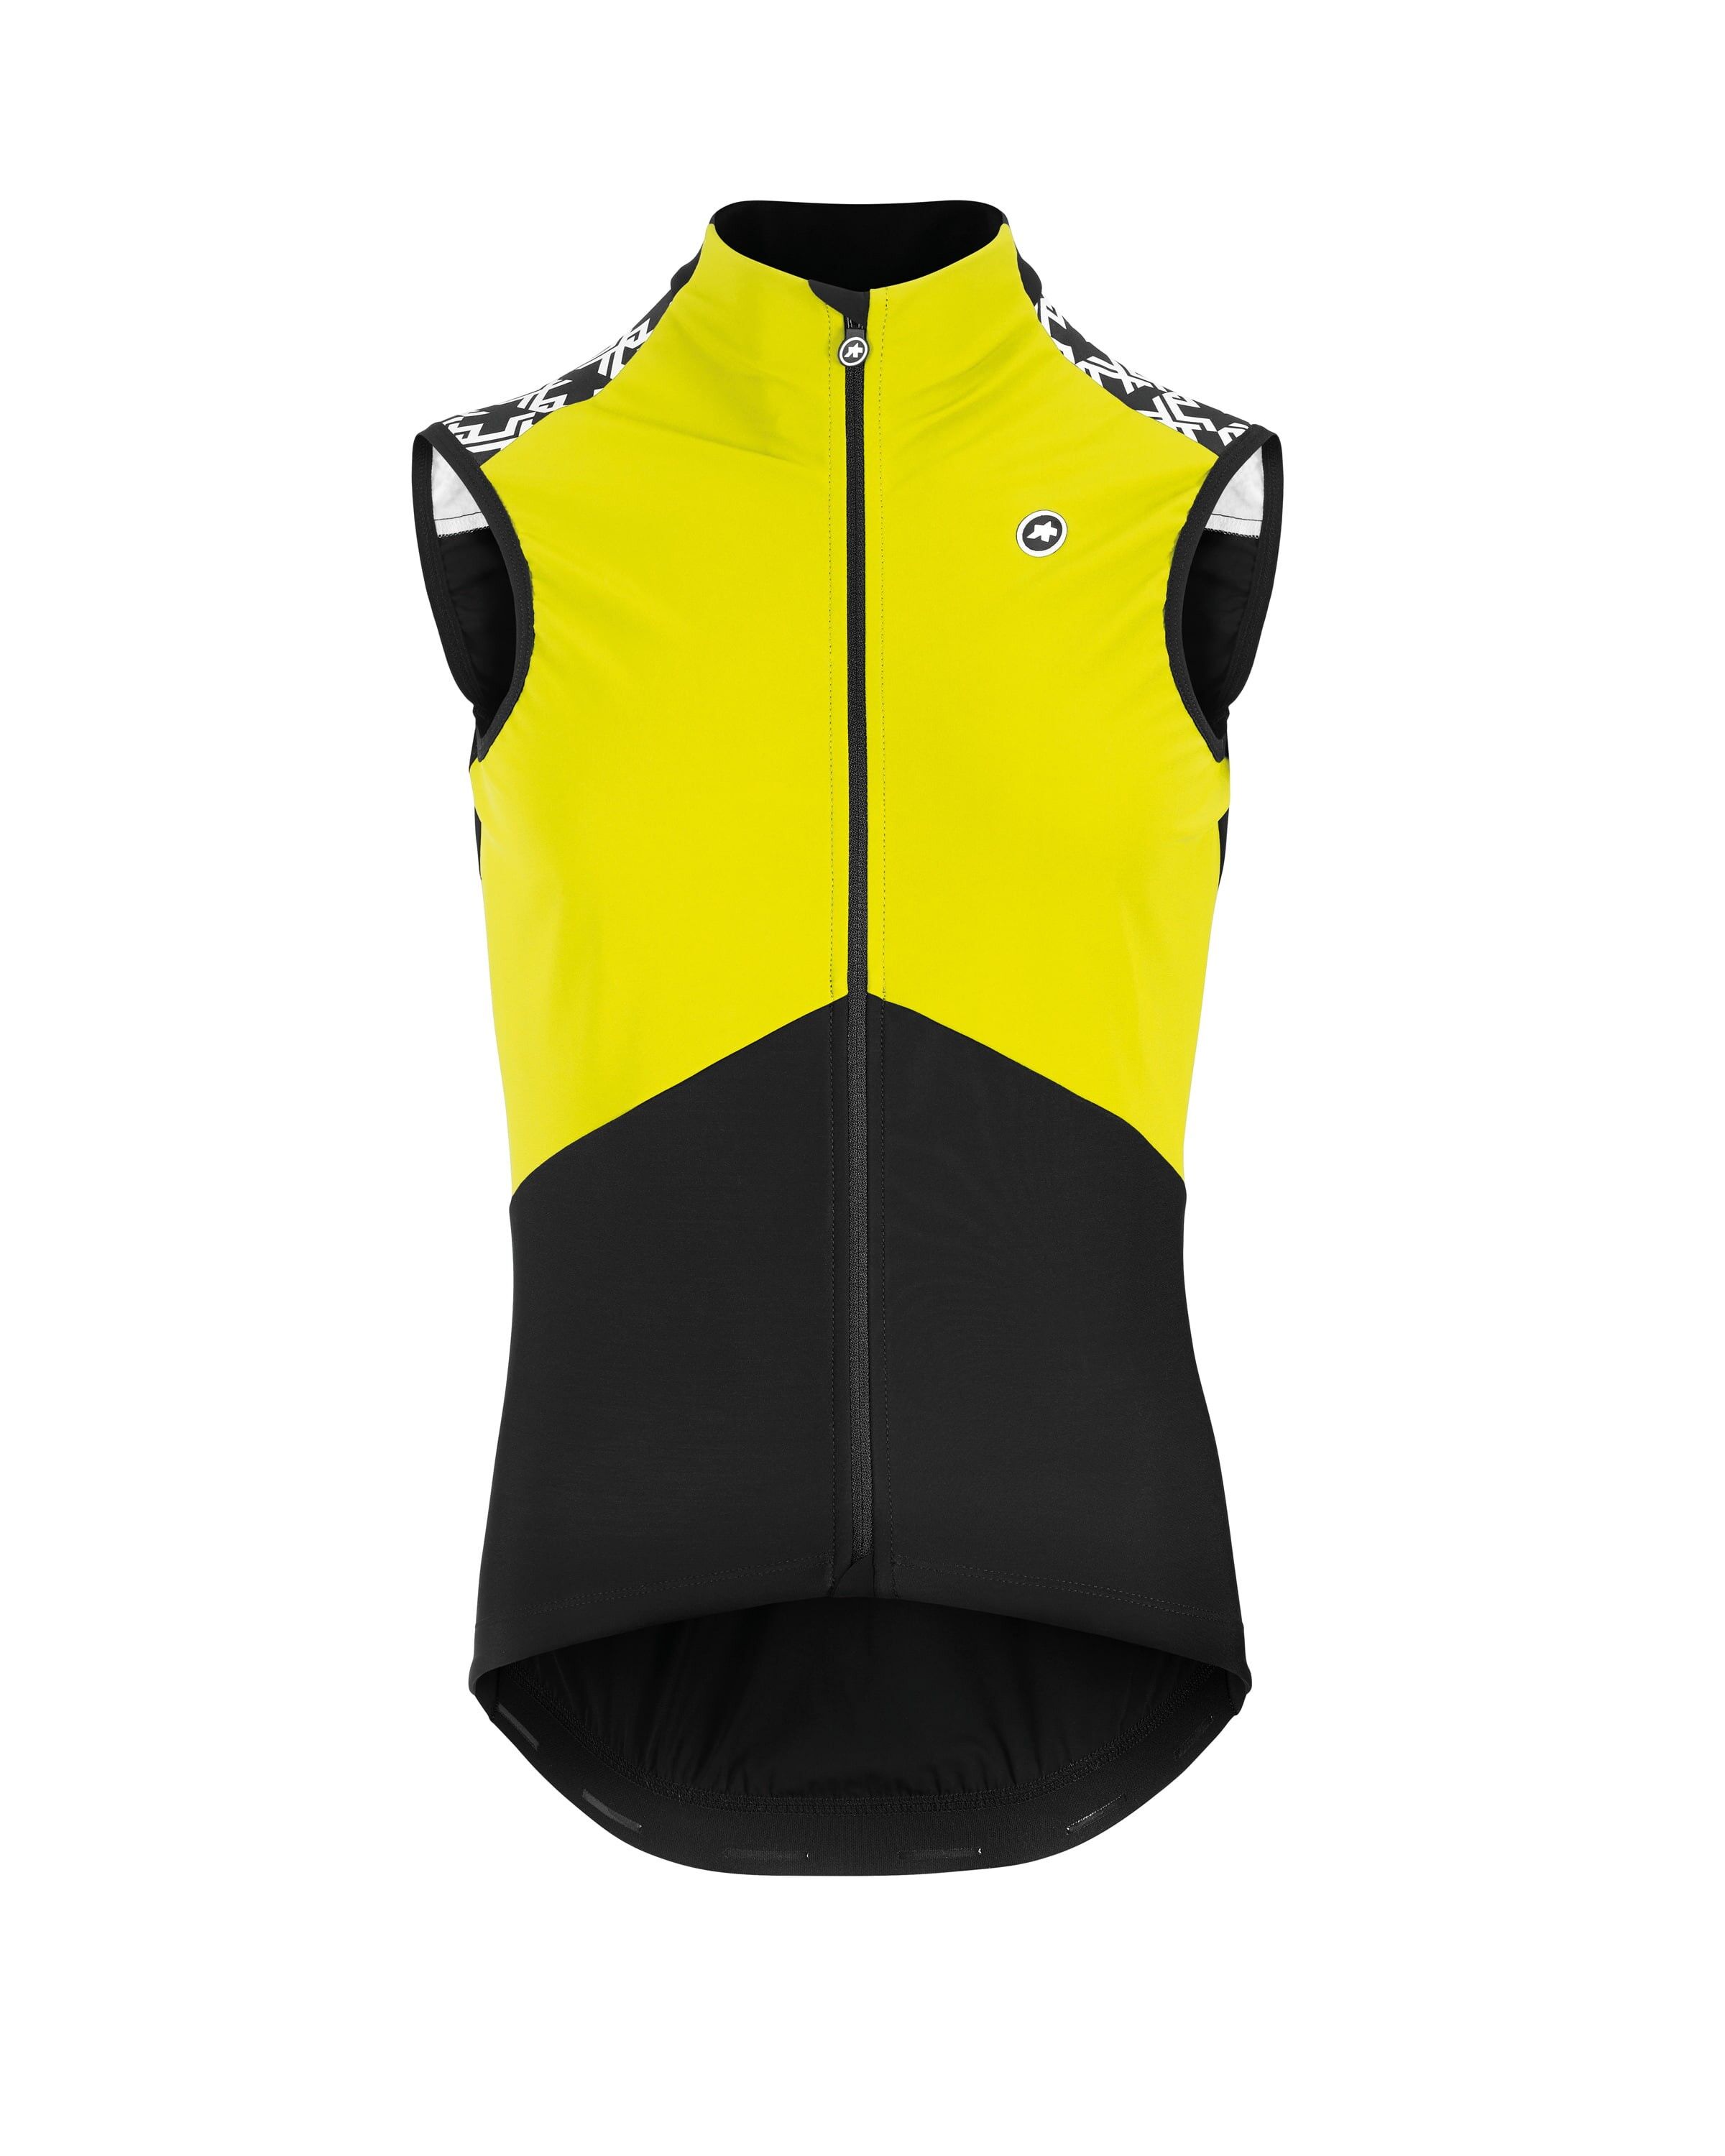 Assos Mille GT Spring Fall Airblock Vest - Cycling windproof jacket - Men's